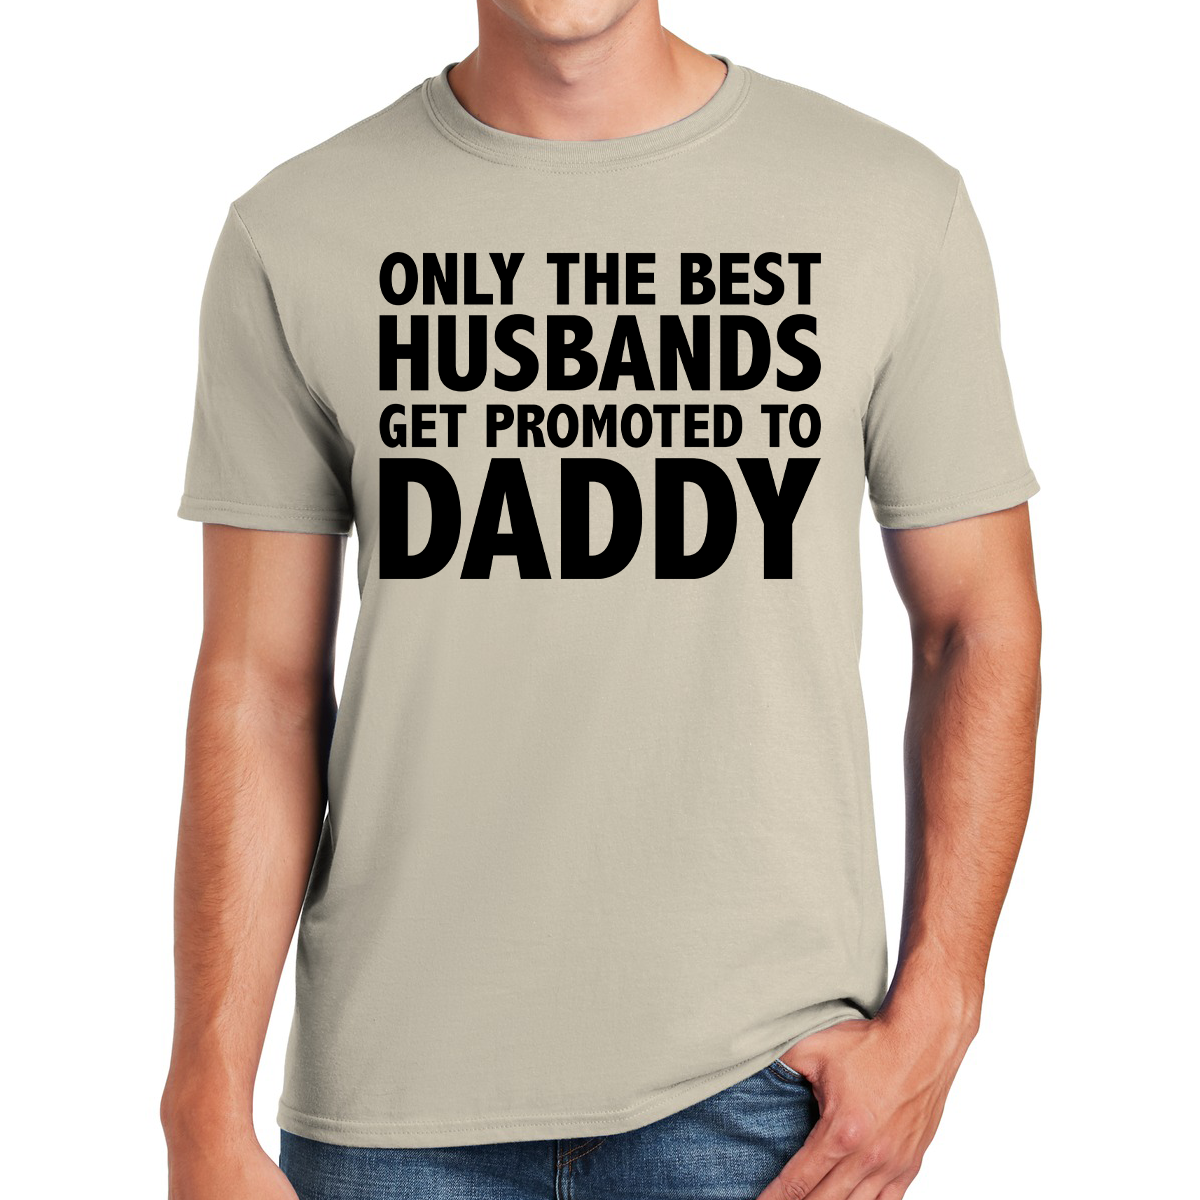 Only The Best Husbands Get Promoted To Daddy Celebrating Fatherhood Awesome Dad T-shirt